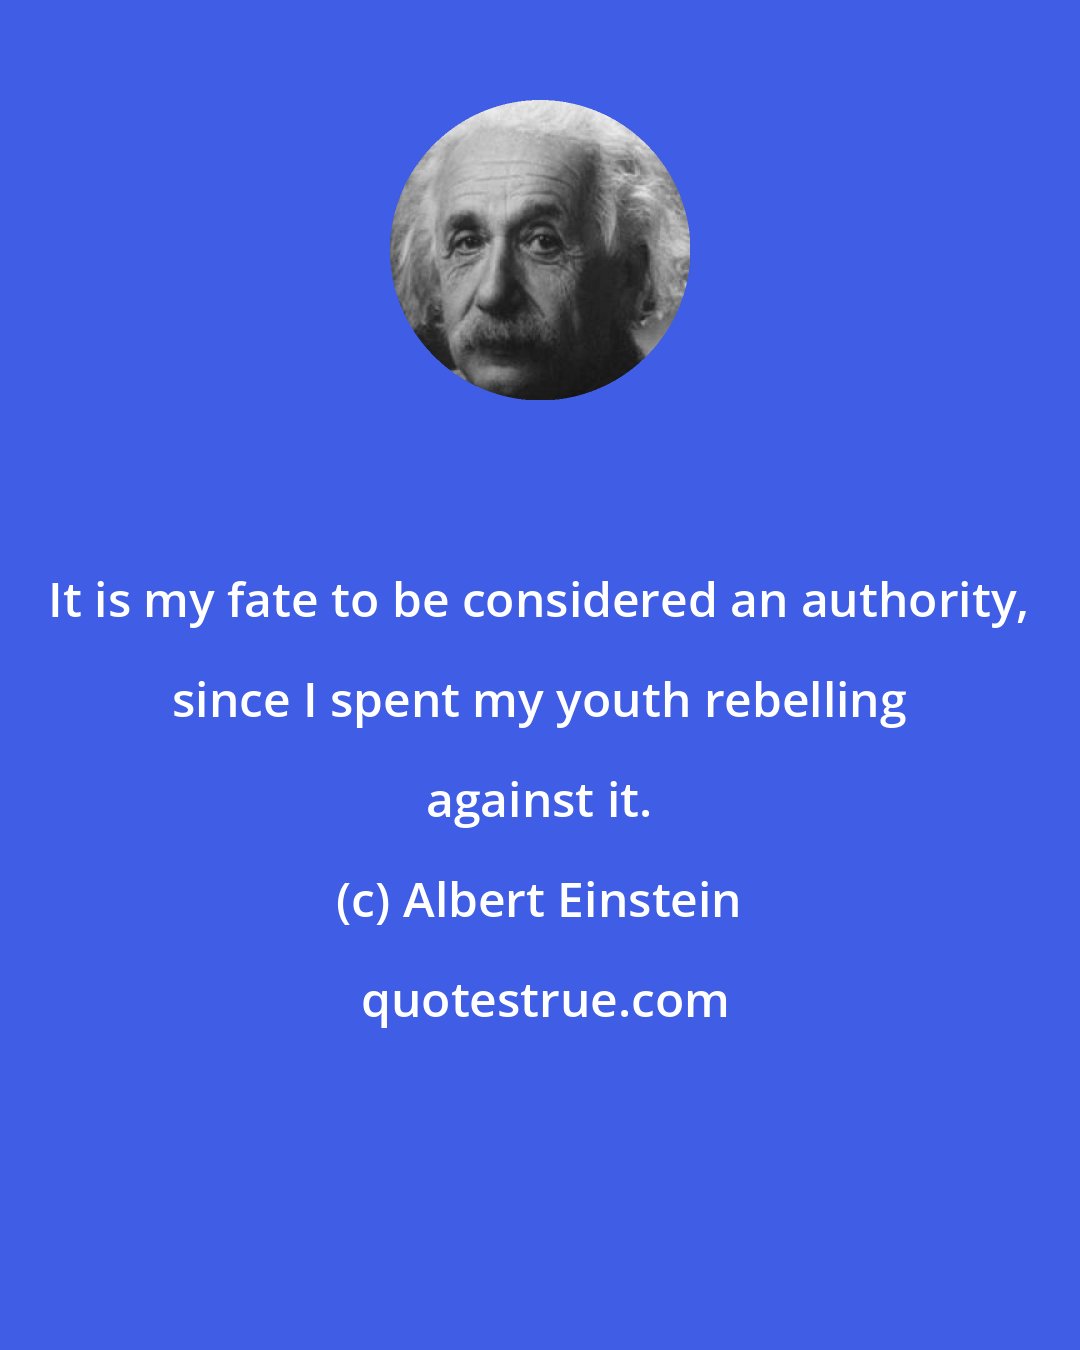 Albert Einstein: It is my fate to be considered an authority, since I spent my youth rebelling against it.